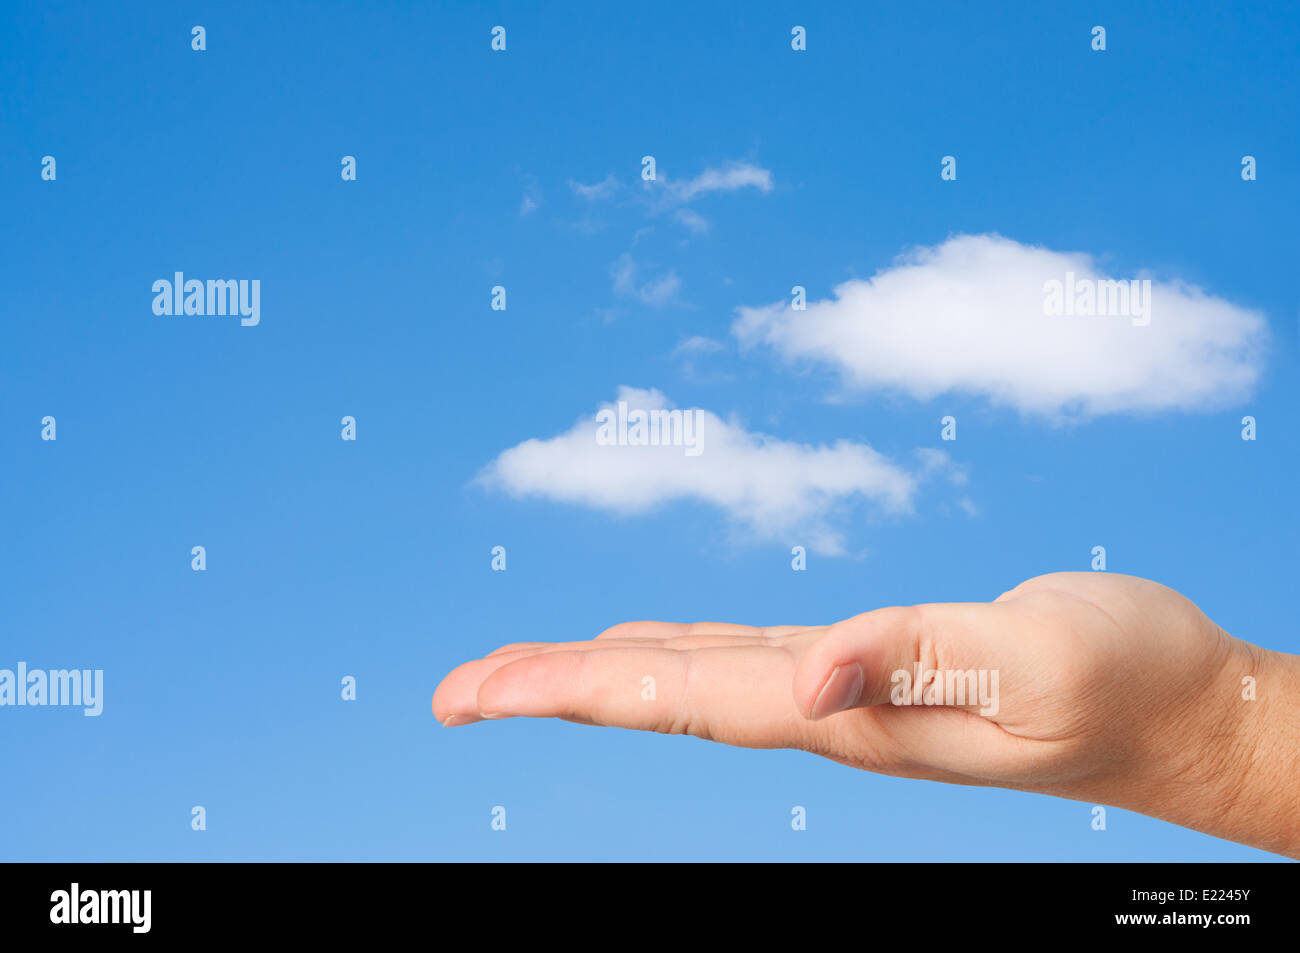 Hand in sky clouds background. Stock Photo